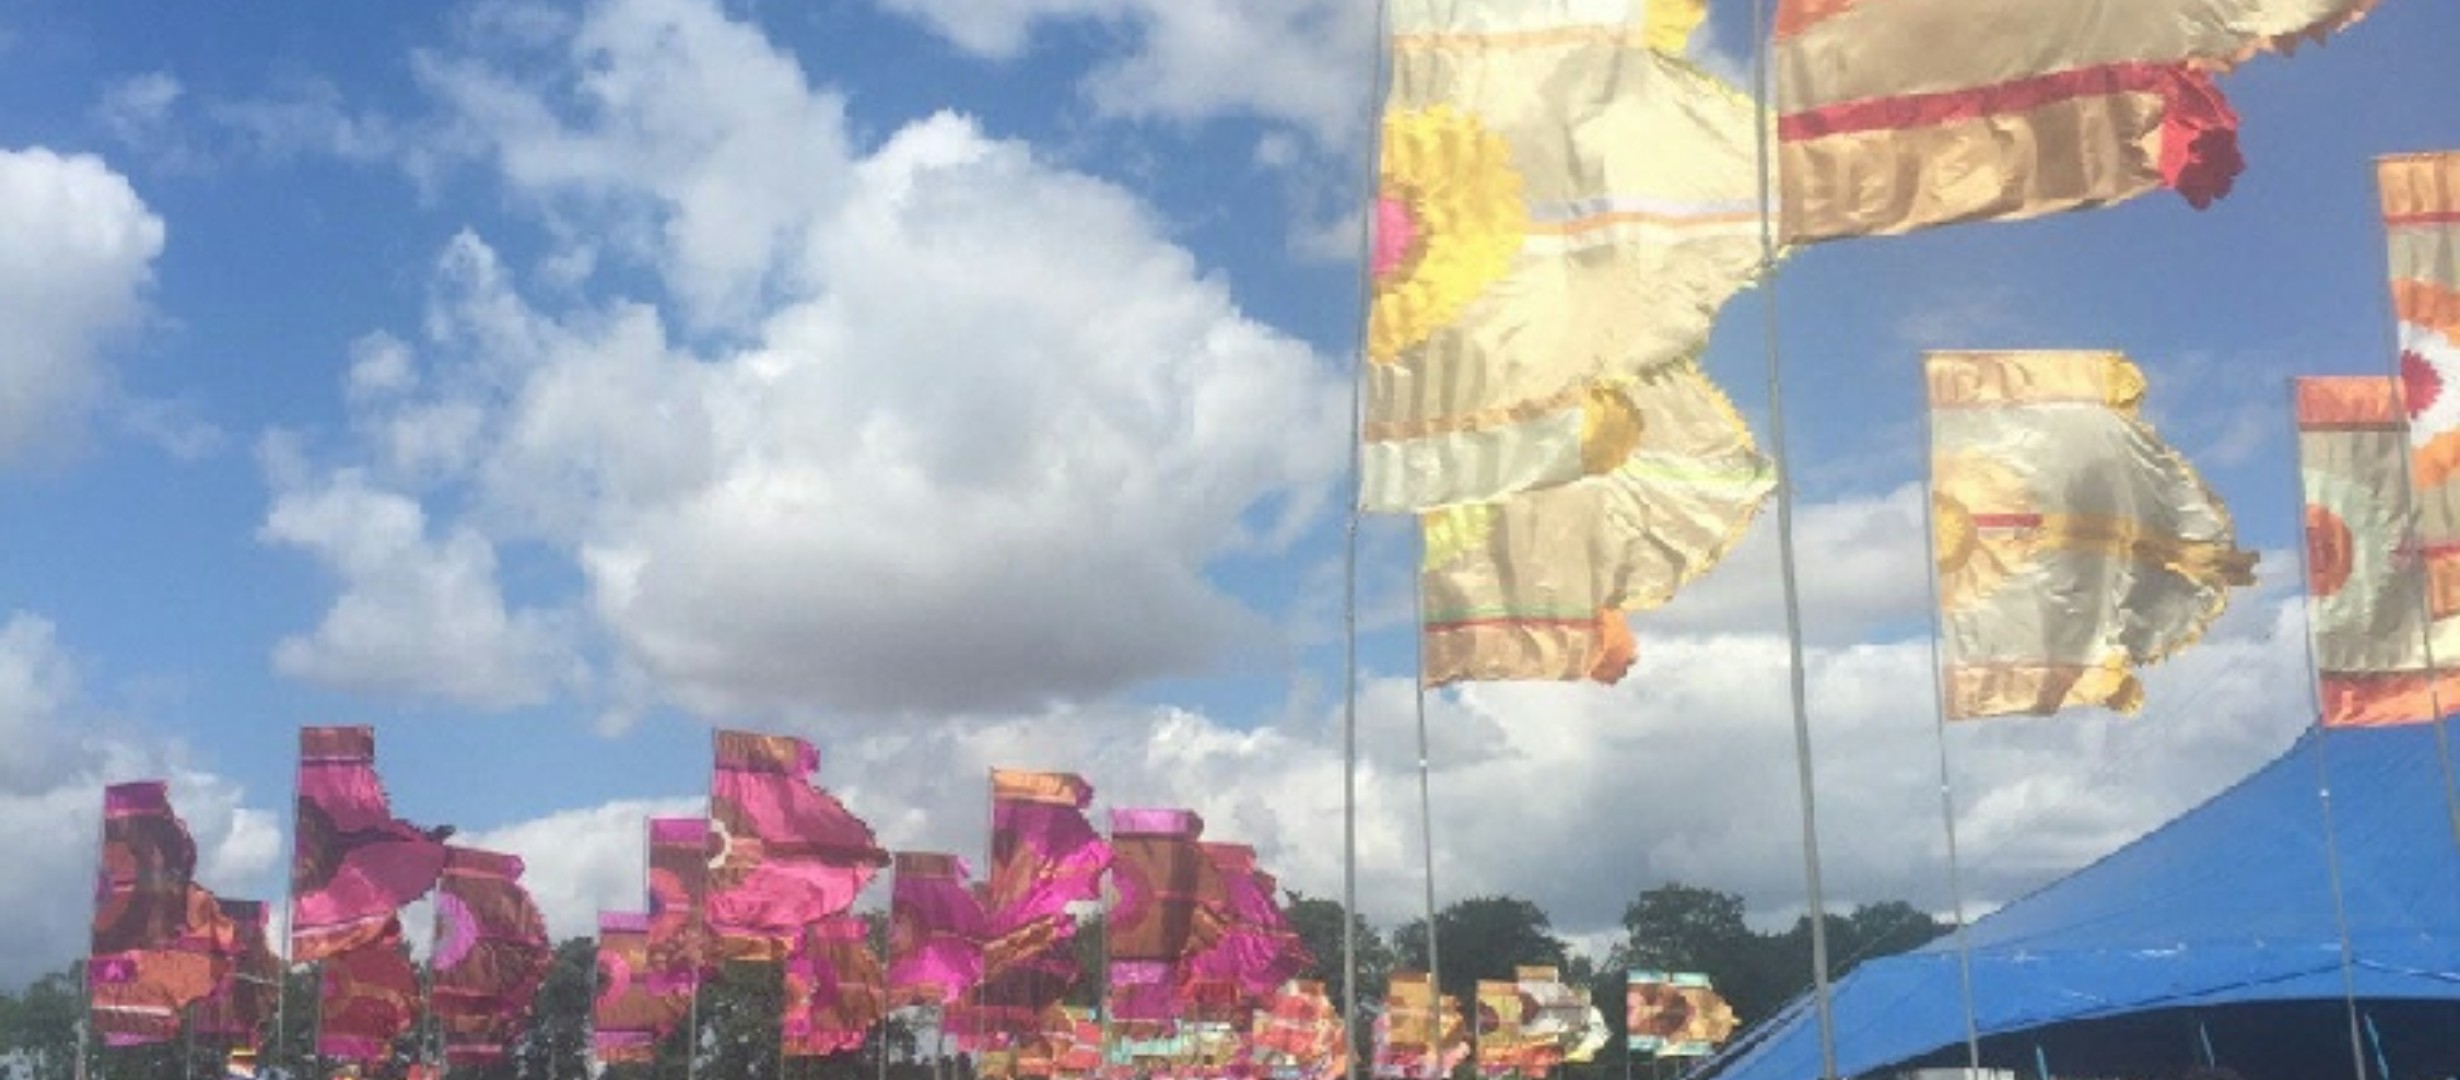 Image shows a number of large festival flags in yellow and pink against the blue, cloudy sky